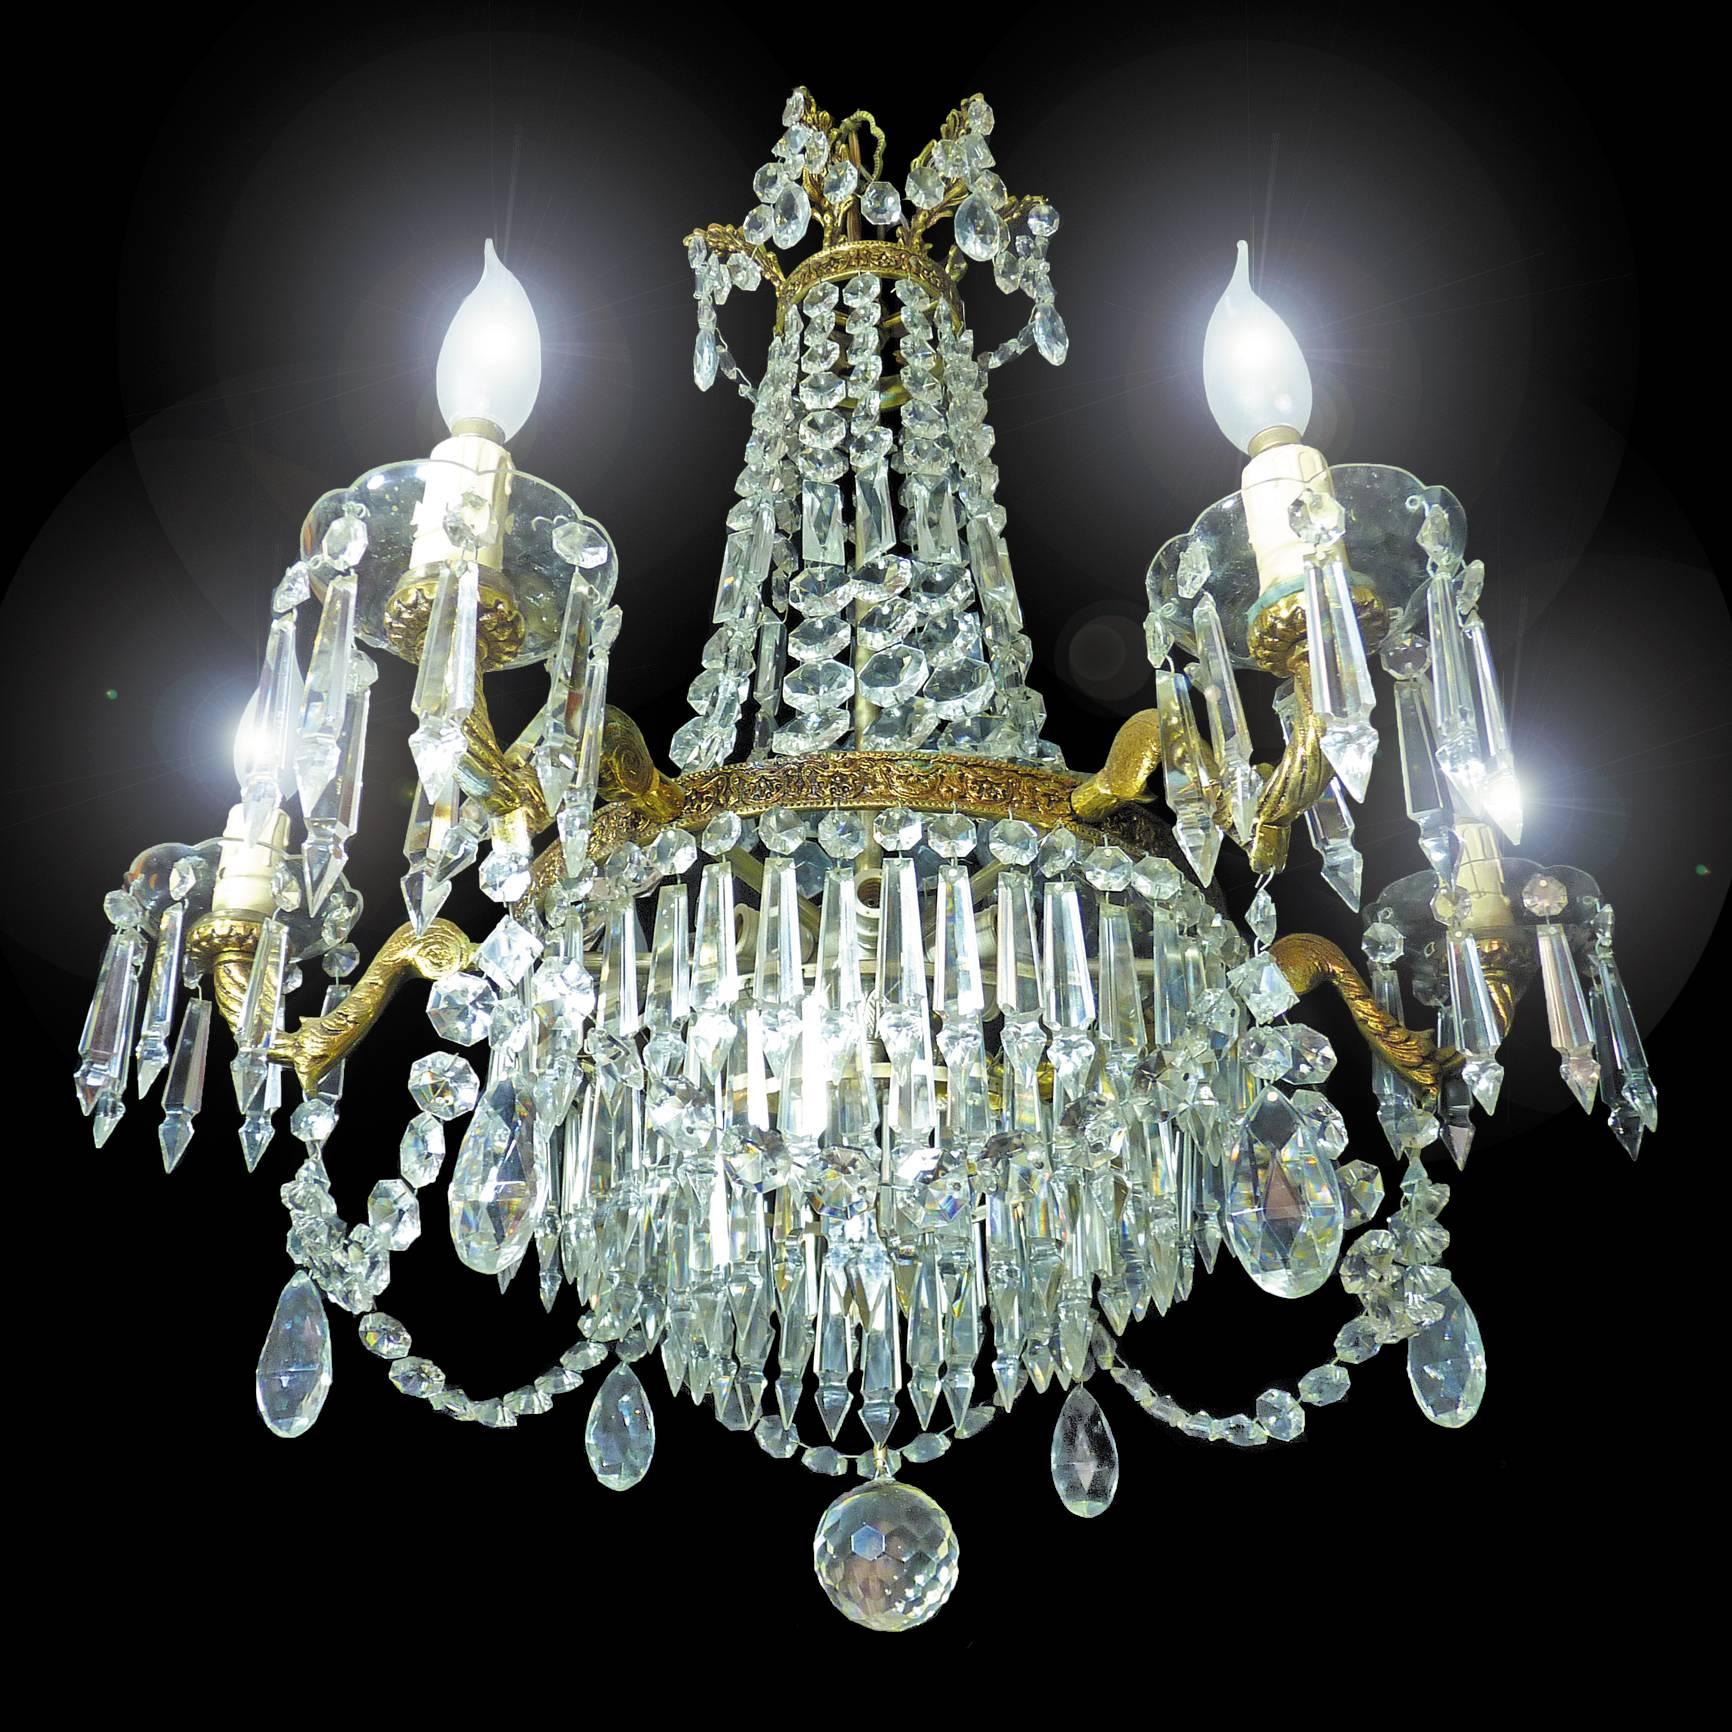 Stunning large French Empire cut crystal and bronze twelve-light chandelier with crystal drops and swags
Measures:
Diameter 26 in/ 66 cm
Height 45 in (32 in+ 13 in/chain) / 115 cm (70 cm + 35 cm/chain)
Weight 34 lb/15 Kg
Twelve light bulbs E14/ good